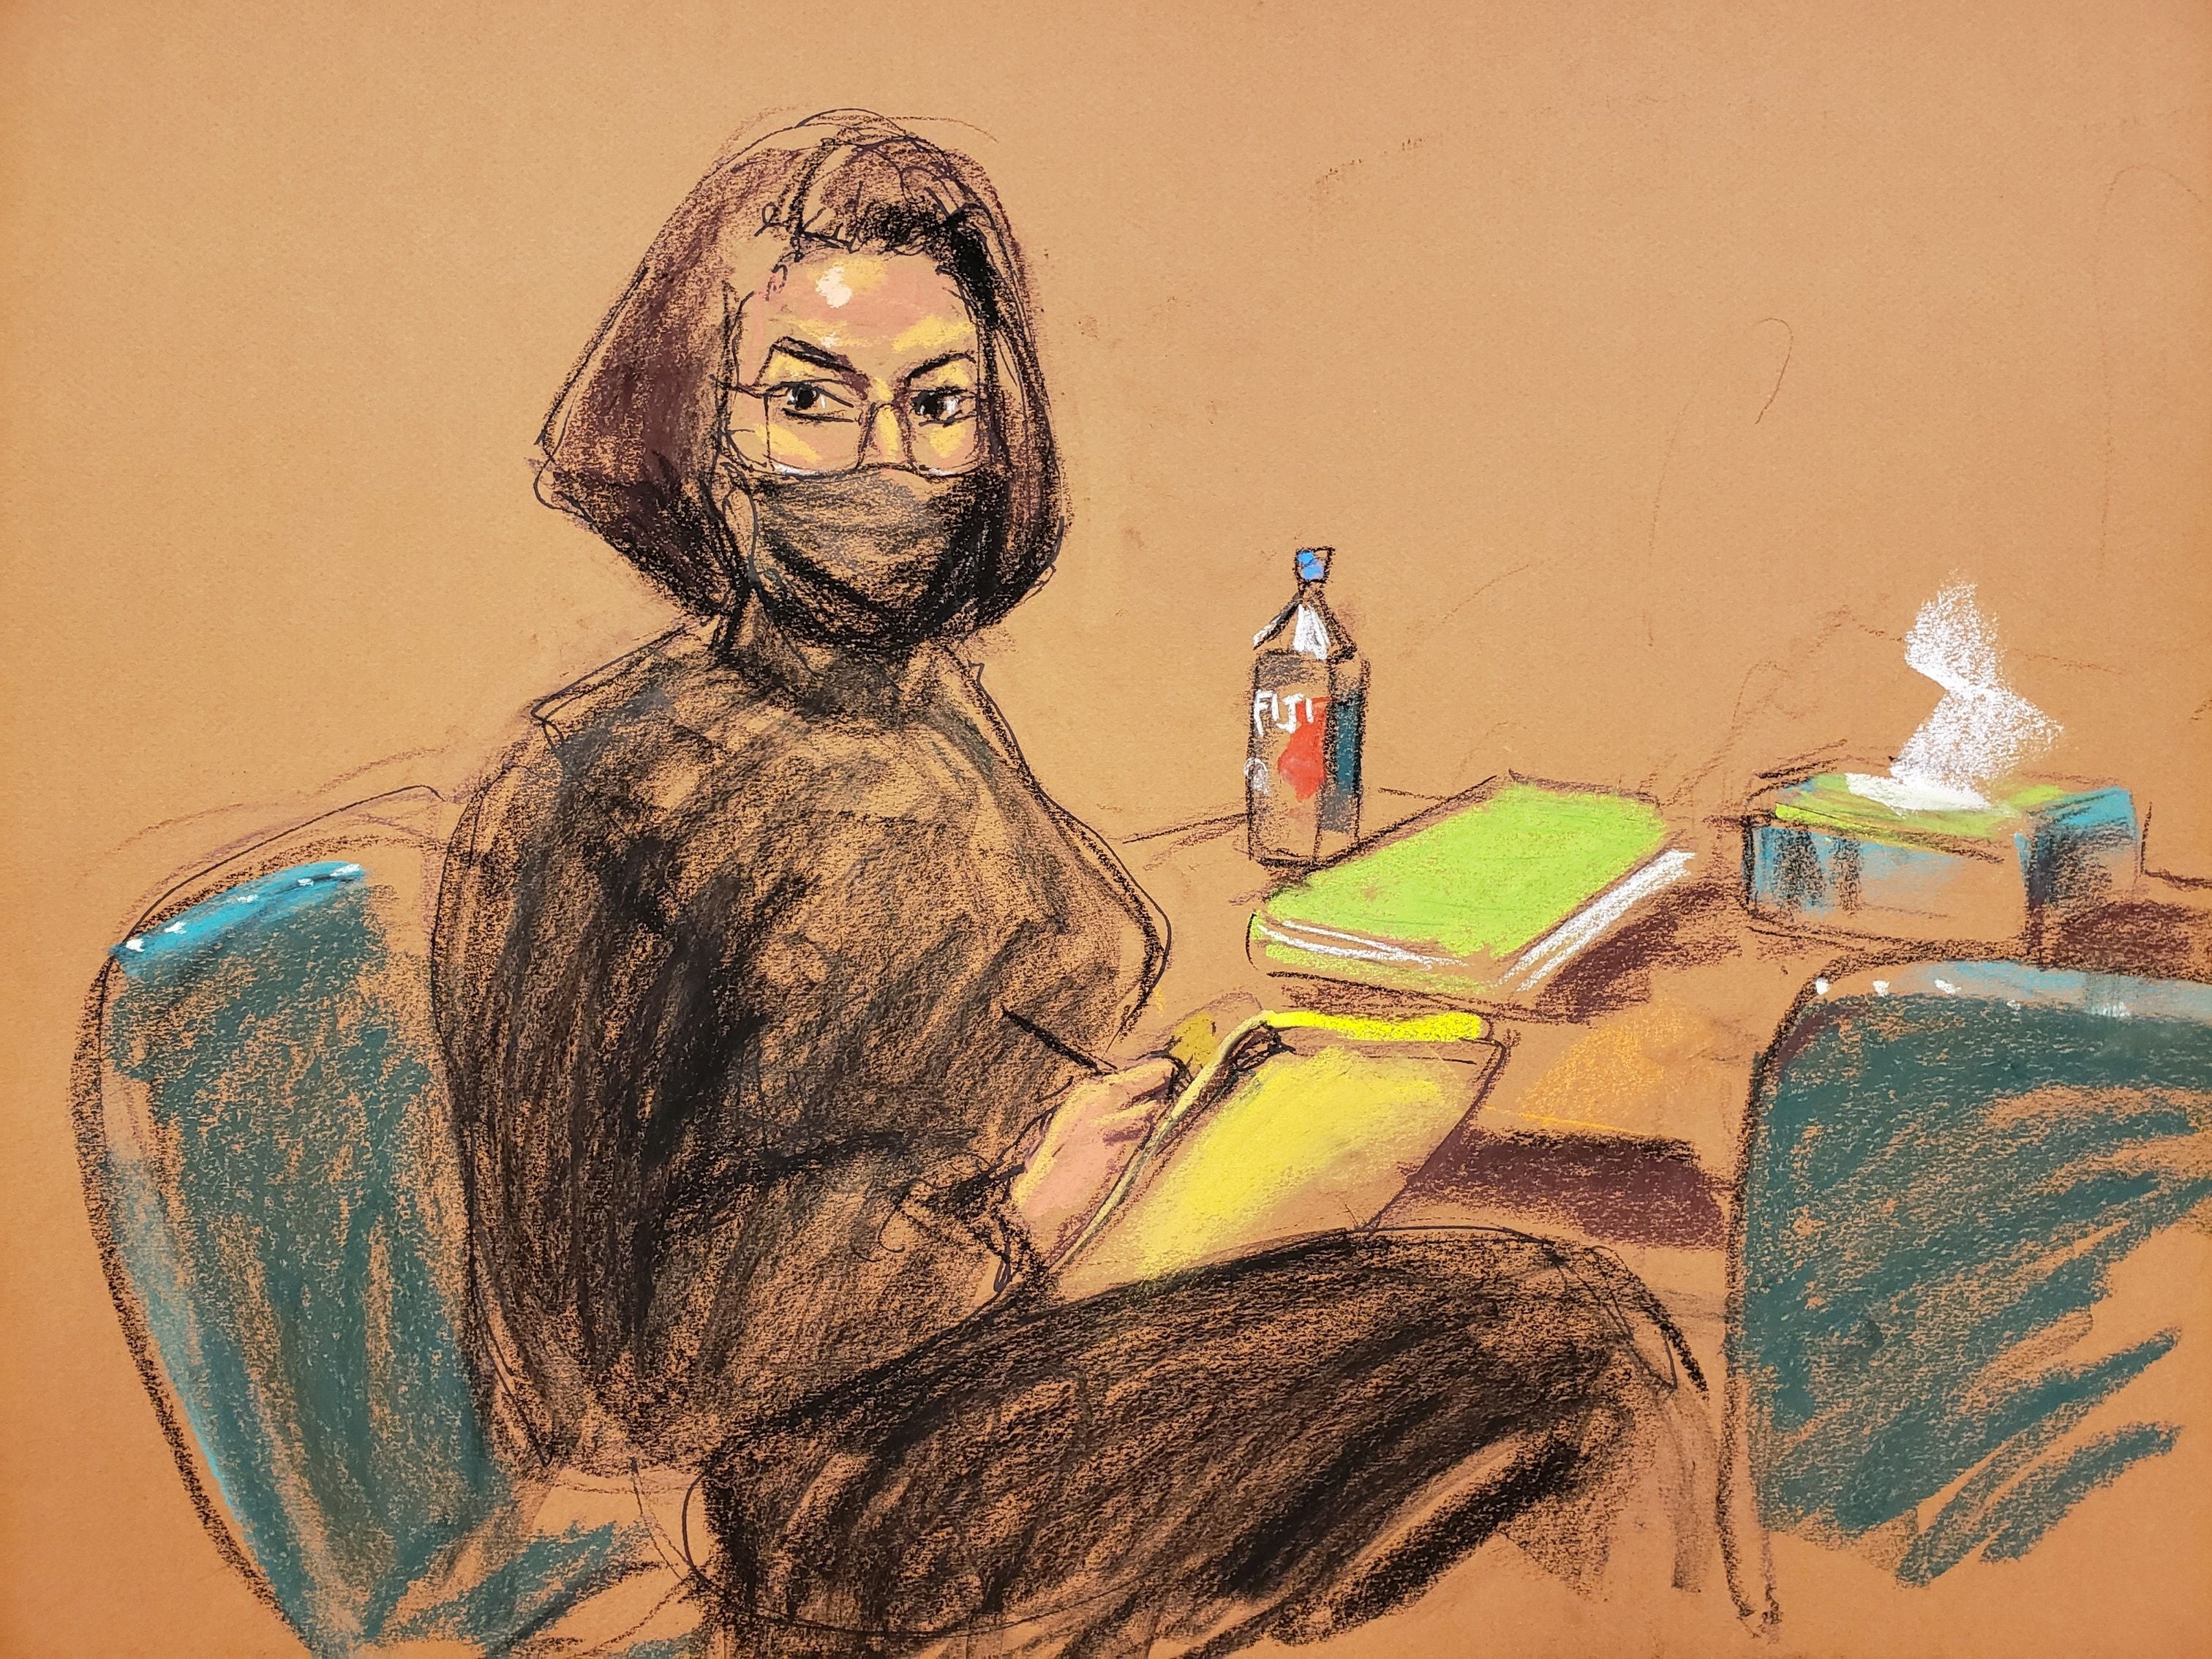 Ghislaine Maxwell turns to sketch court sketch artist Jane Rosenberg during the trial.